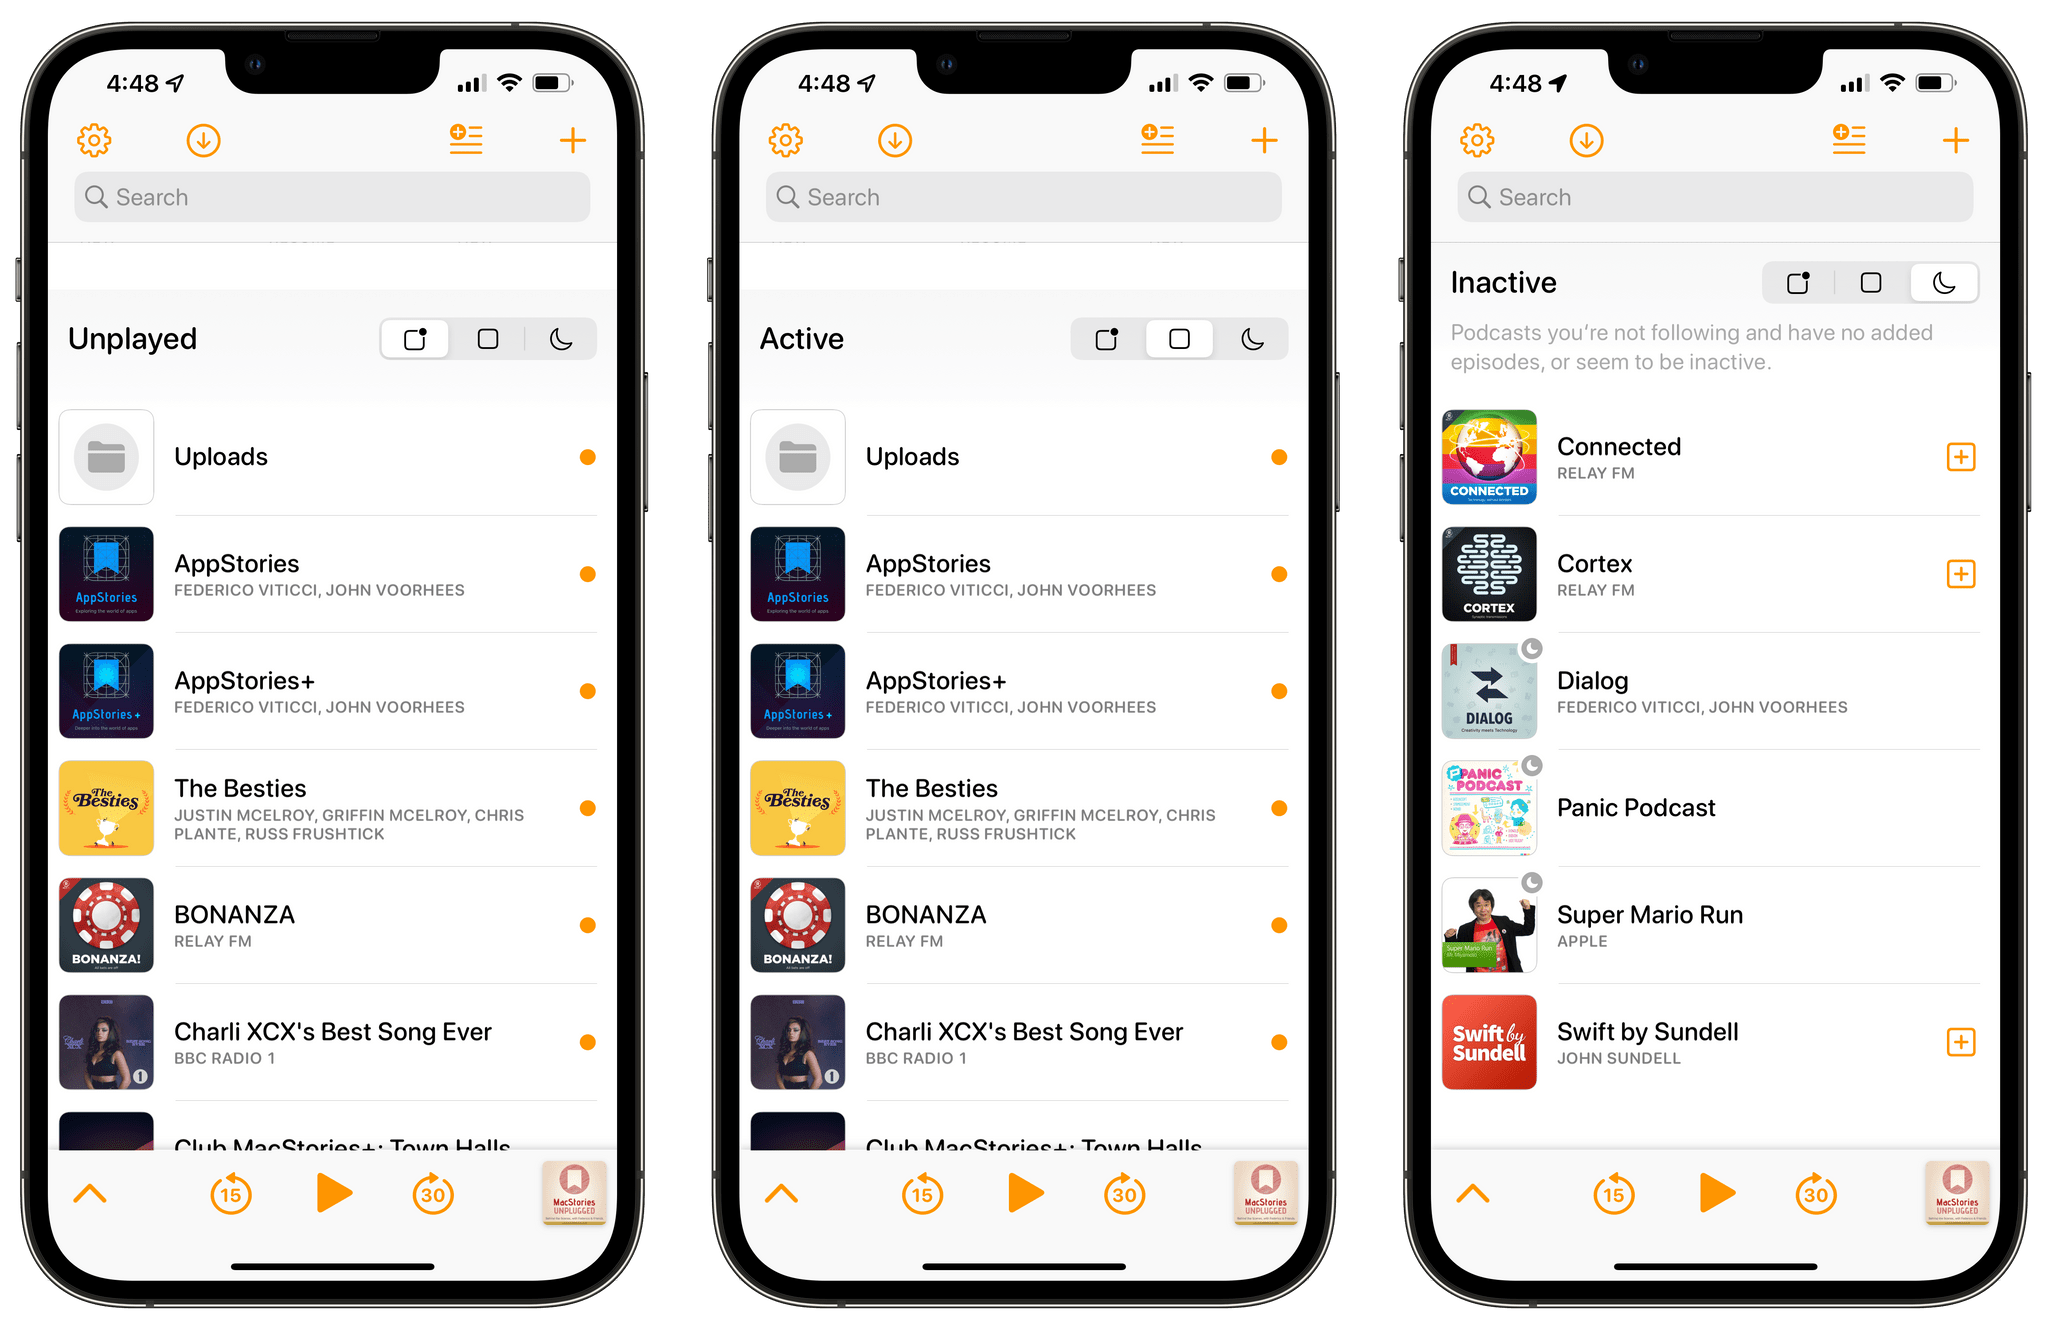 Overcast's Unplayed, Active, and Inactive lists.